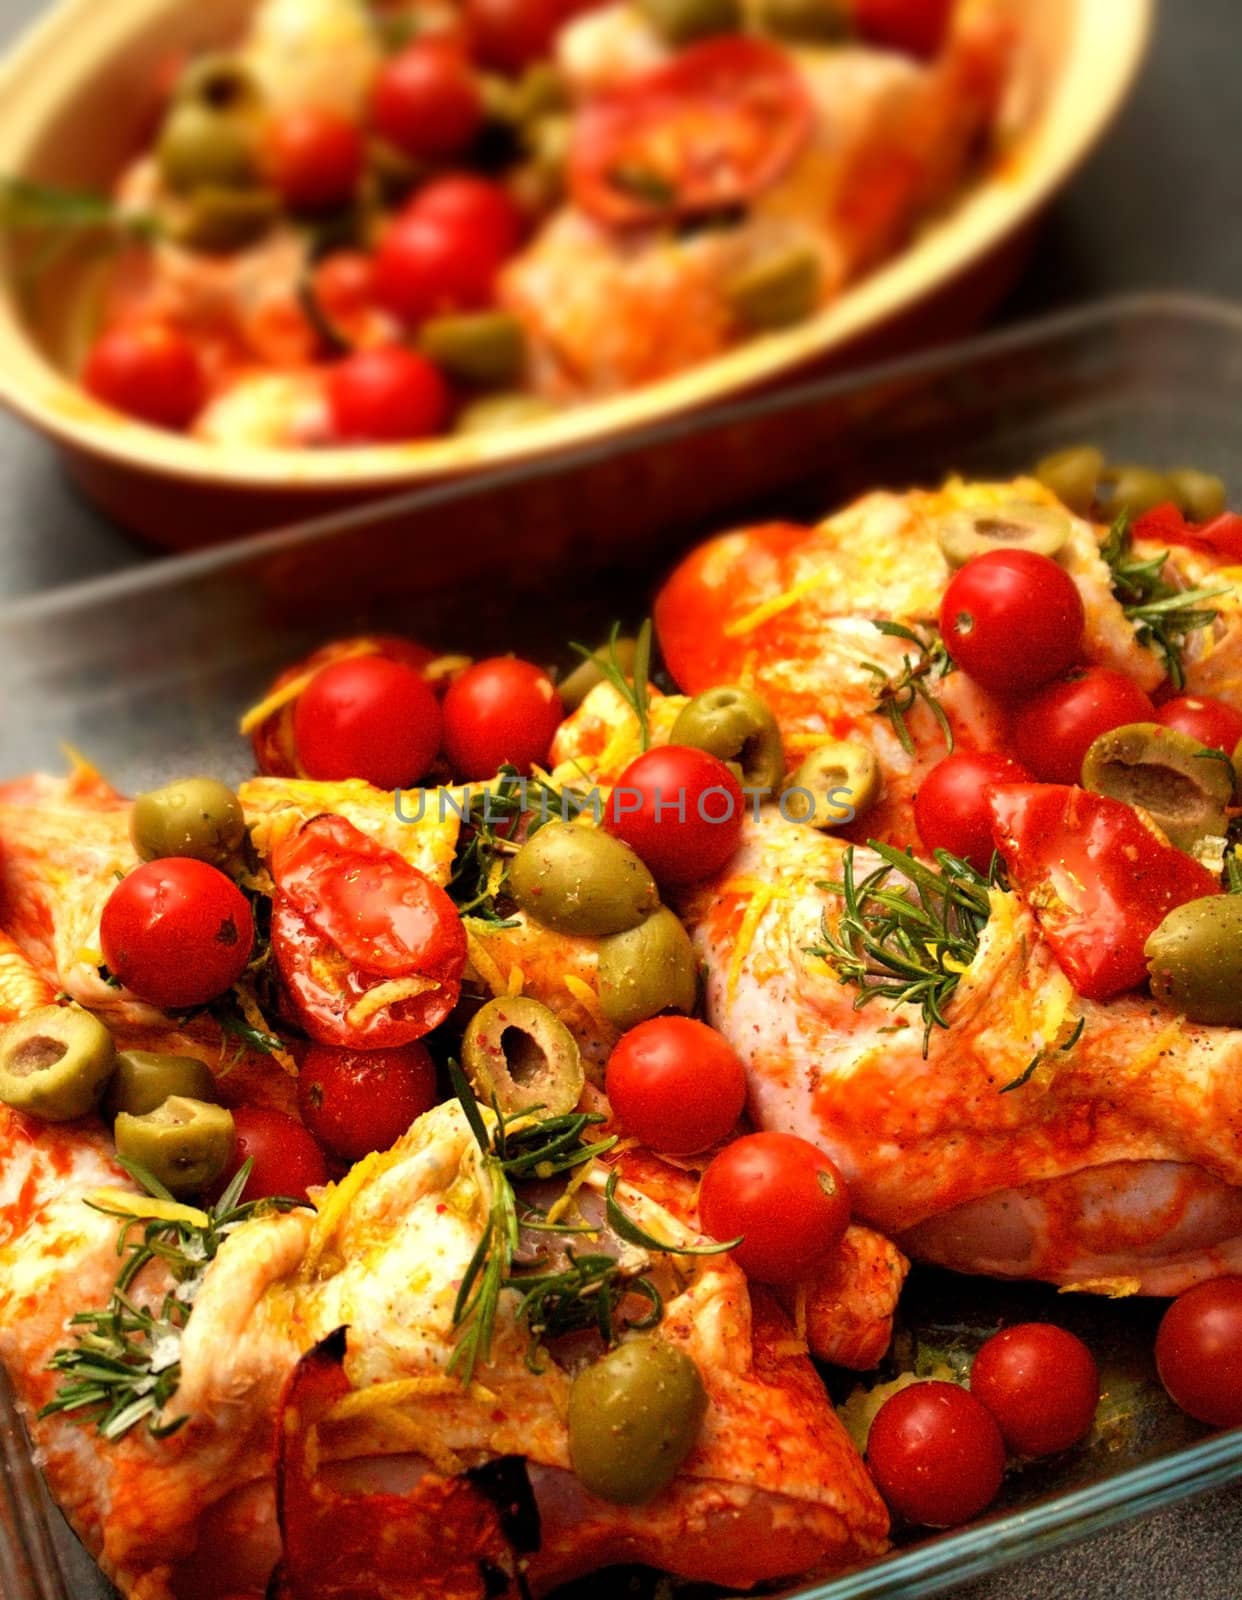 Chicken legs with tomatoes, olives and rosemary Italian style